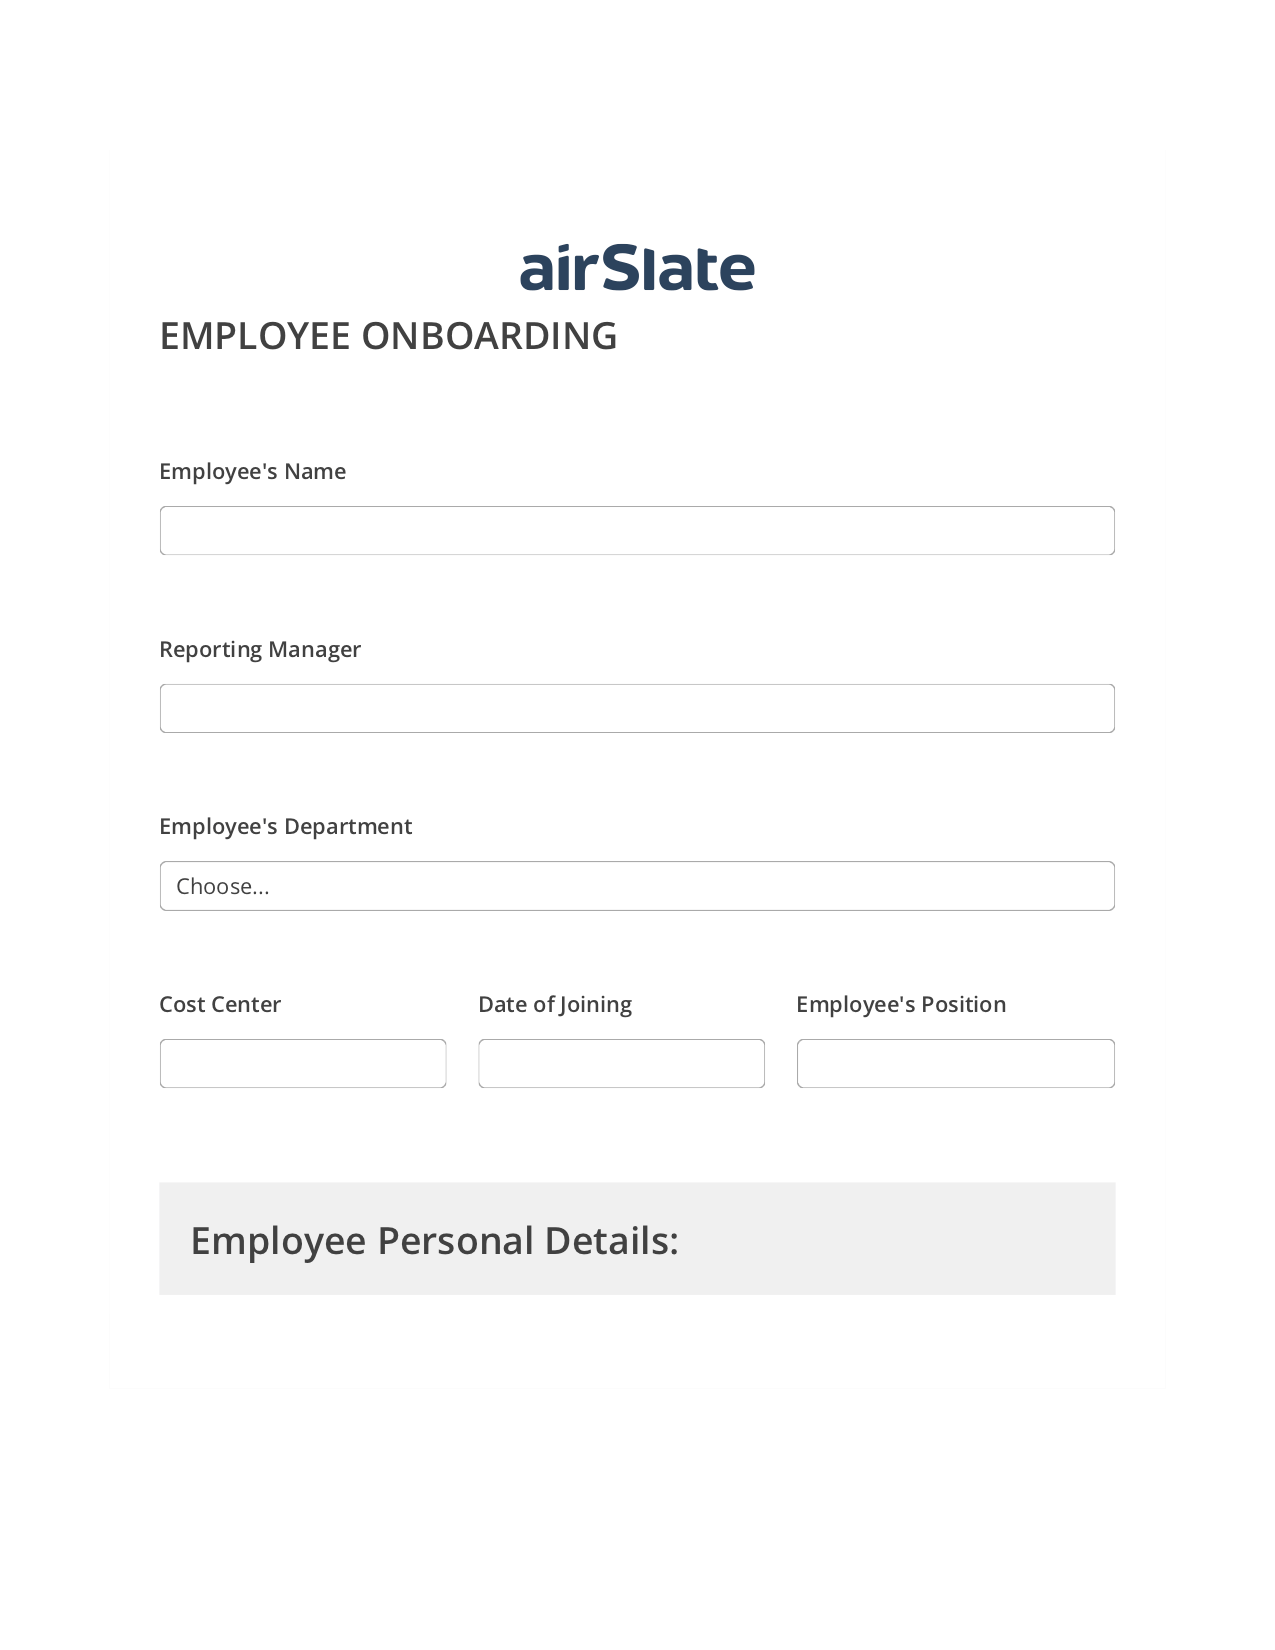 Employee Onboarding Workflow Pre-fill from Litmos bot, Create slate from another Flow Bot, Export to Smartsheet